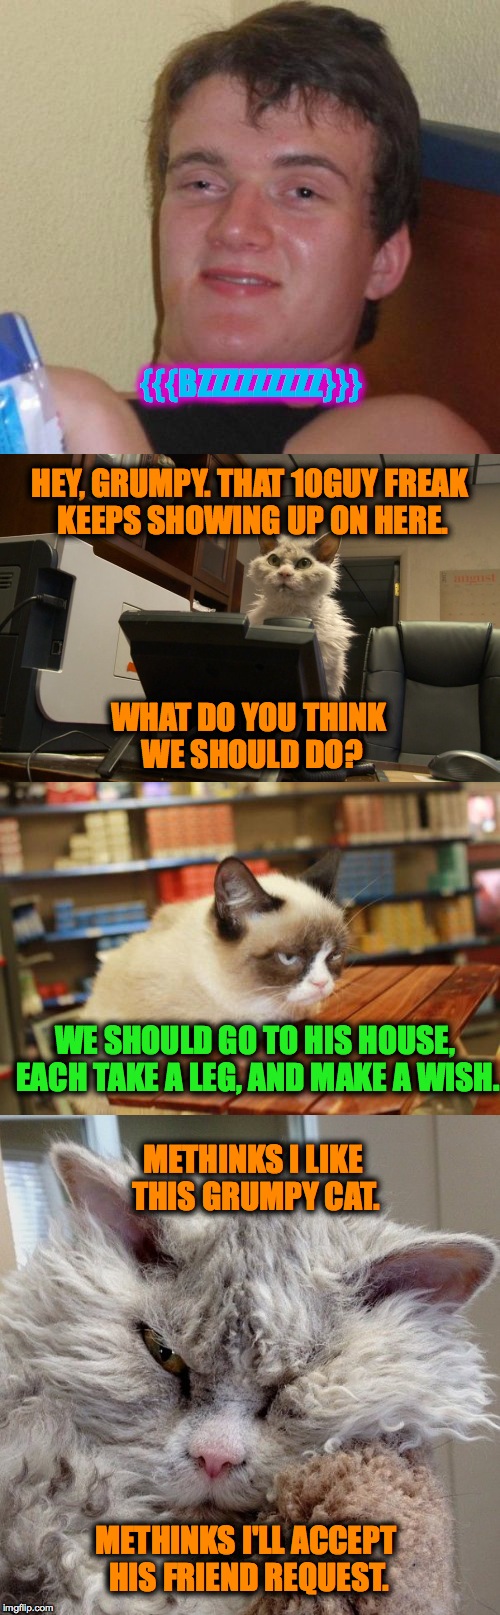 Albert and Grumpy come up with a solution | {{{BZZZZZZZZZ}}}; HEY, GRUMPY. THAT 10GUY FREAK KEEPS SHOWING UP ON HERE. WHAT DO YOU THINK WE SHOULD DO? WE SHOULD GO TO HIS HOUSE, EACH TAKE A LEG, AND MAKE A WISH. METHINKS I LIKE THIS GRUMPY CAT. METHINKS I'LL ACCEPT HIS FRIEND REQUEST. | image tagged in albert and grumpy vs 10guy | made w/ Imgflip meme maker